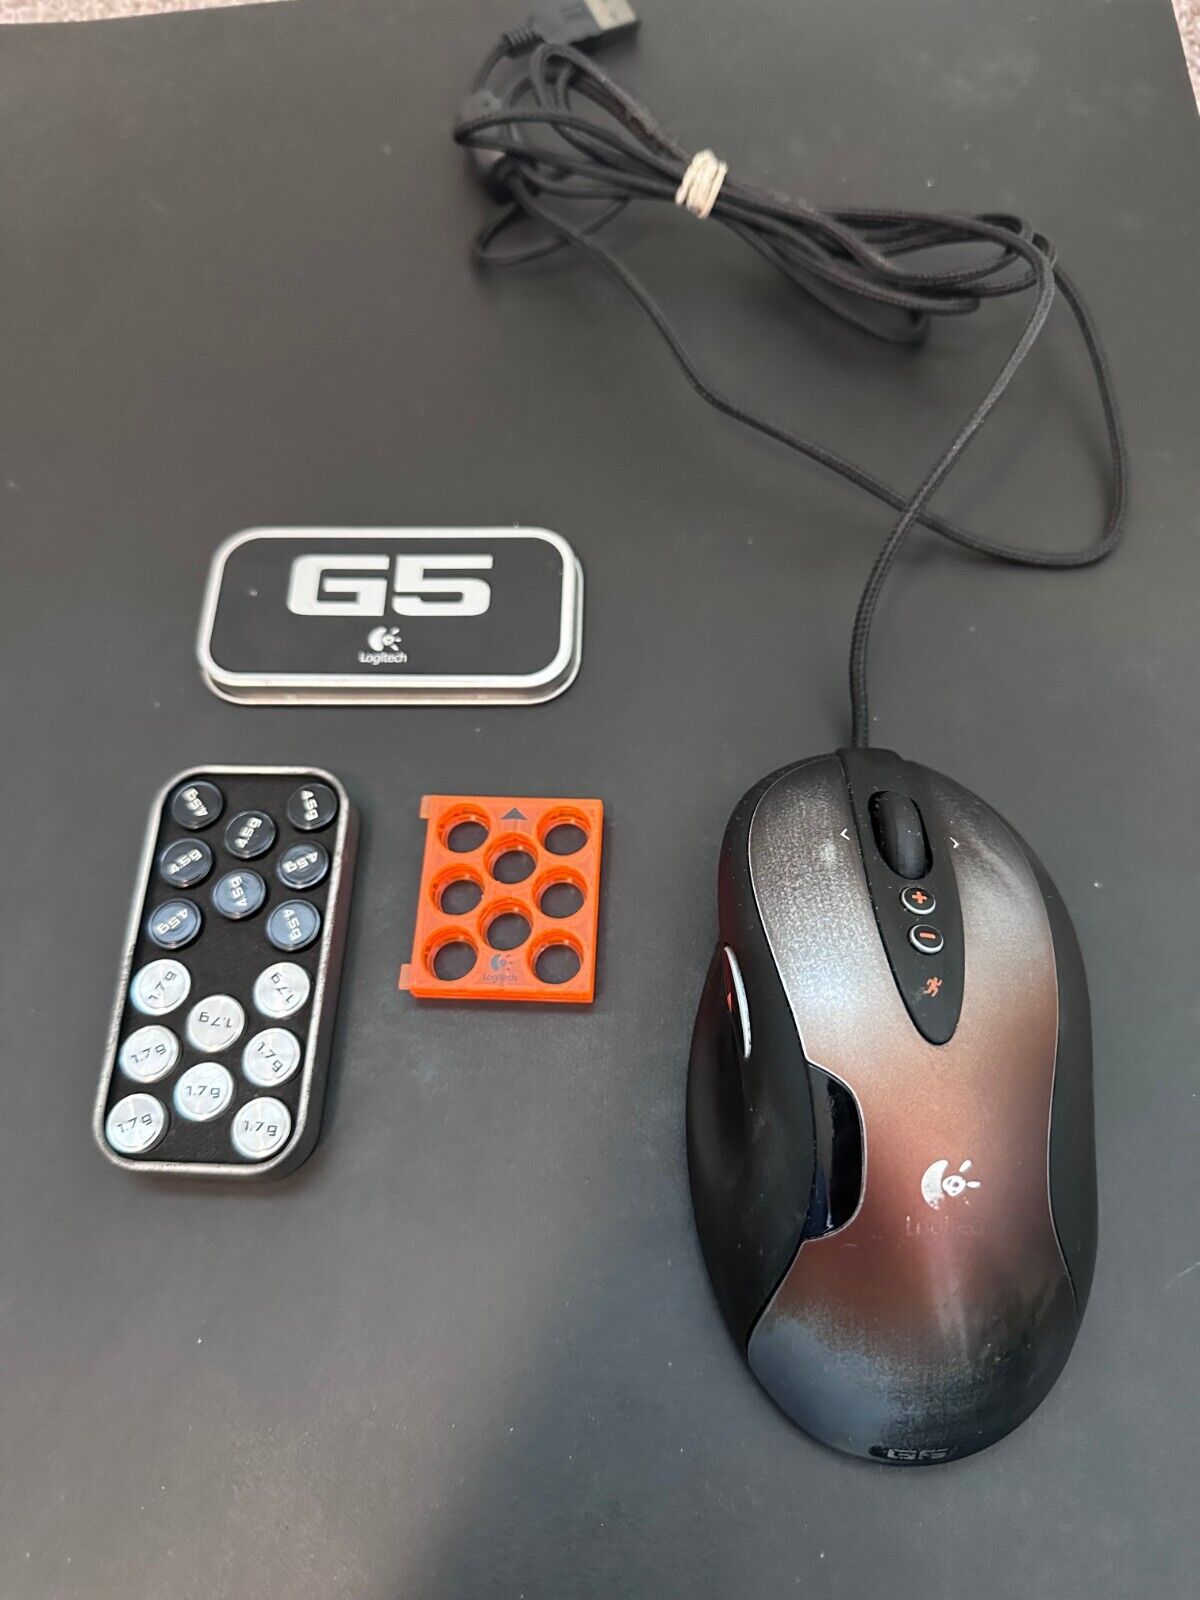 RARE Logitech G5 USB Laser Gaming Mouse w/ Adjustable Weight Cartridge and DPI